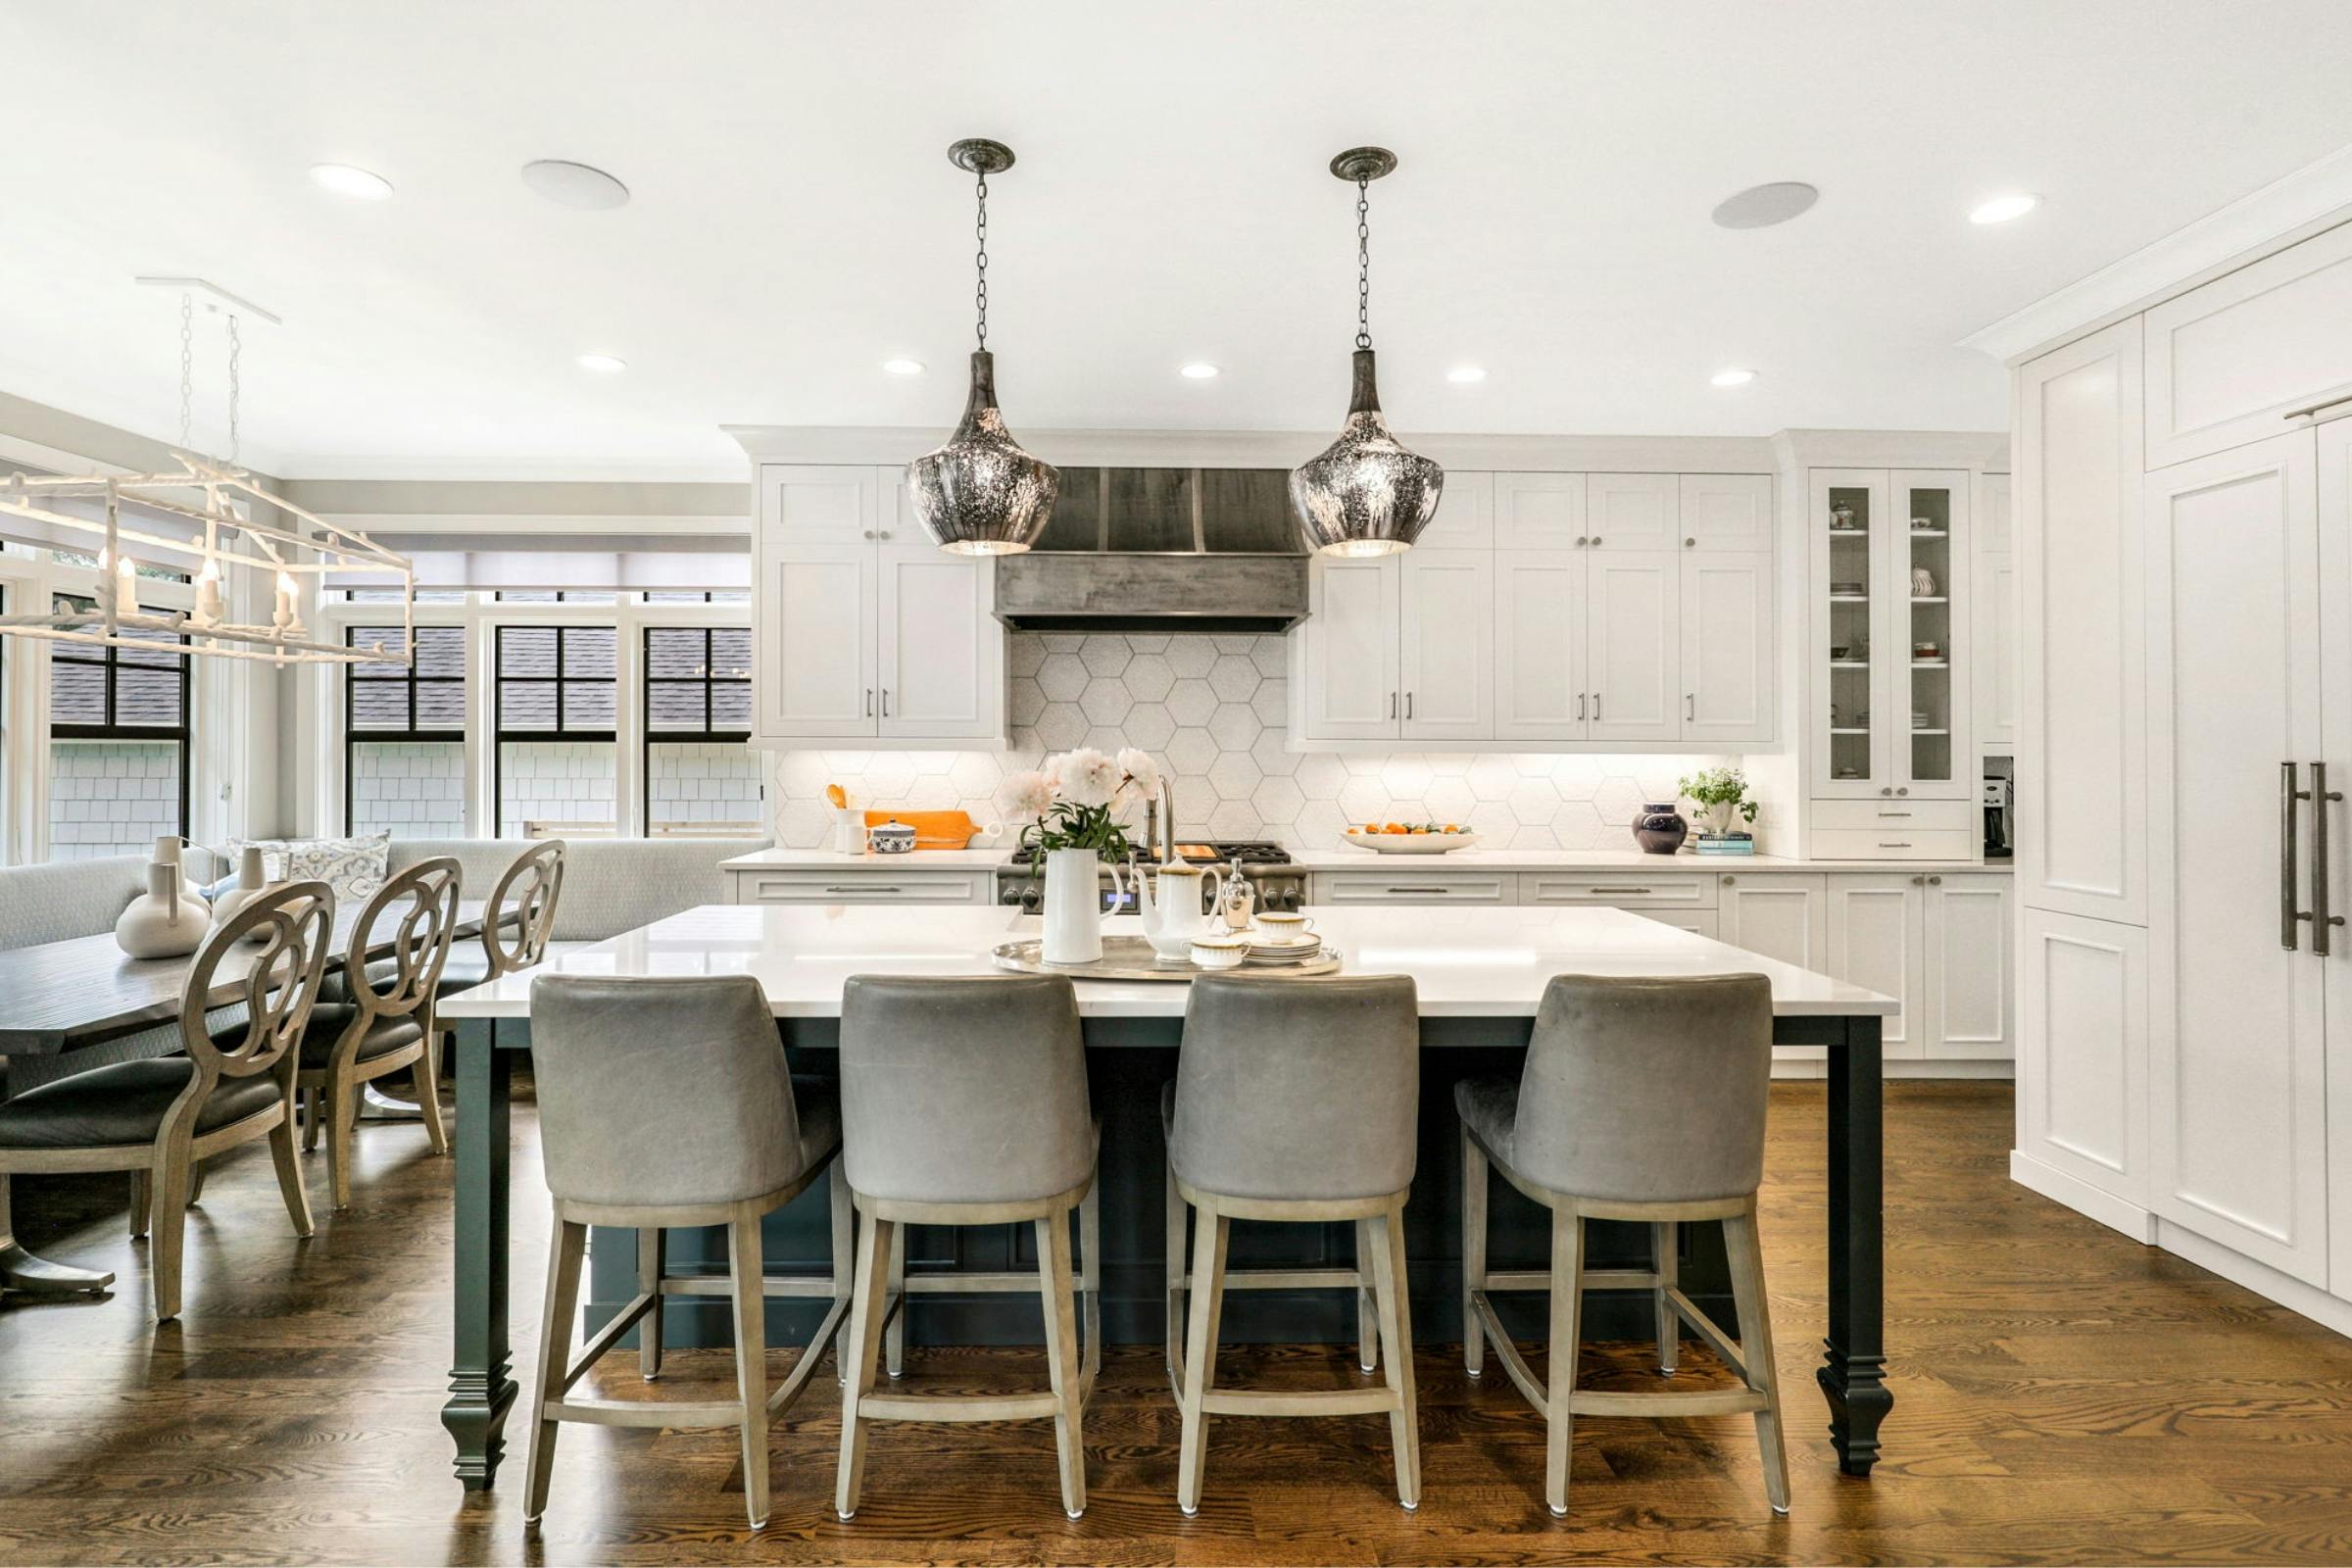 kitchen island with four chairs and pendant lighting above